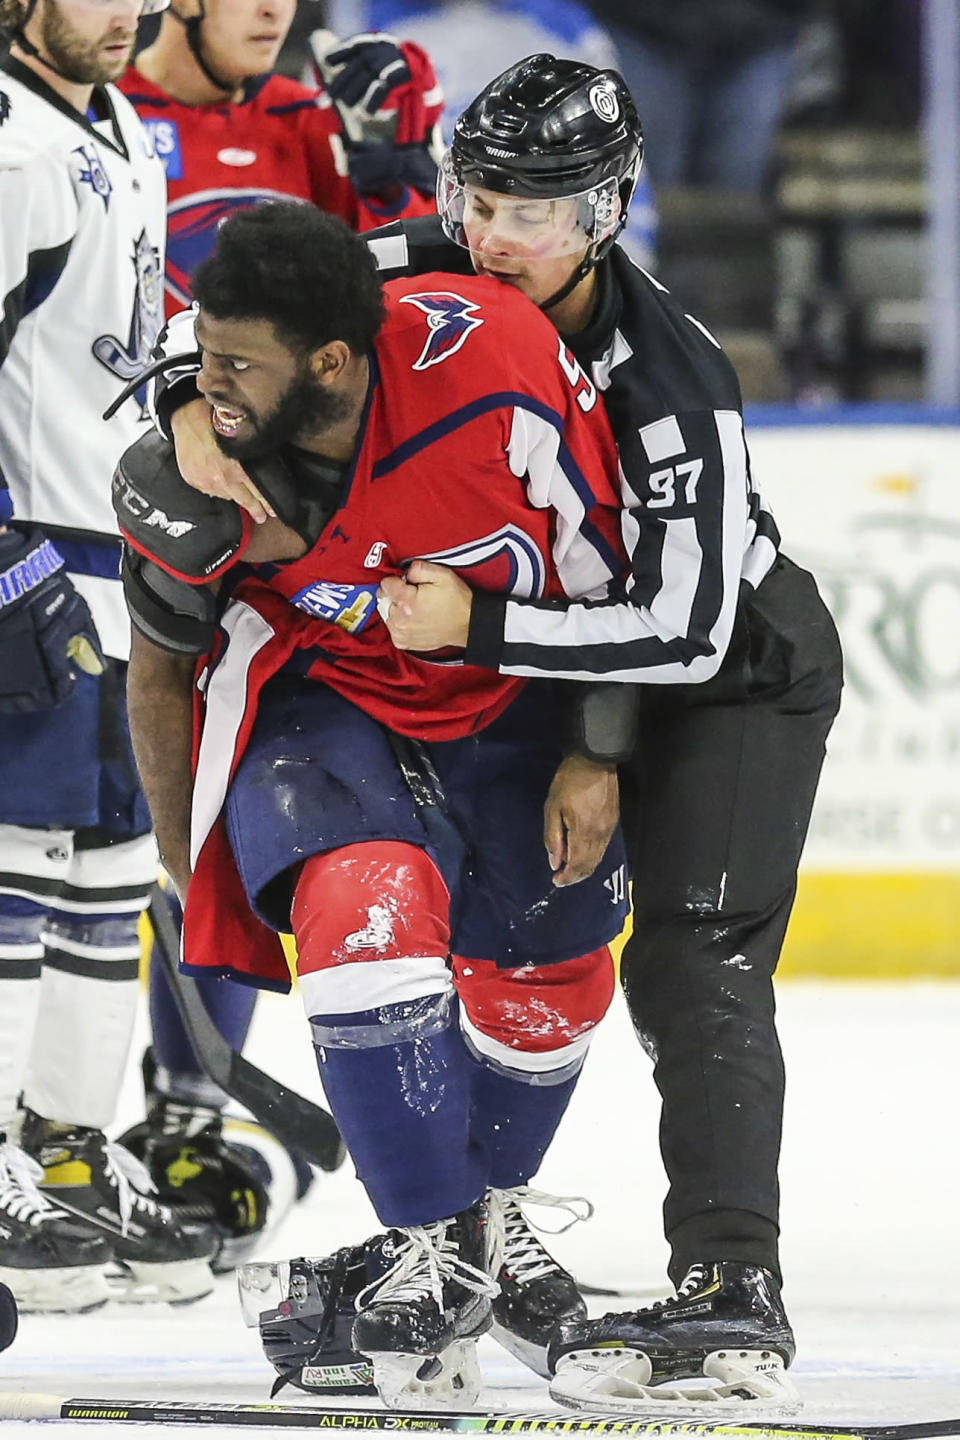 South Carolina Stingrays defenseman Jordan Subban, front left, is held by linesman Shane Gustafson after an on-ice fight during overtime of an ECHL hockey game against the Jacksonville Icemen in Jacksonville, Fla., Saturday, Jan. 22, 2022. The ECHL has suspended Jacob Panetta after the brother of longtime NHL defenseman P.K. Subban accused the Jacksonville defenseman of making “monkey gestures” in his direction. (AP Photo/Gary McCullough)